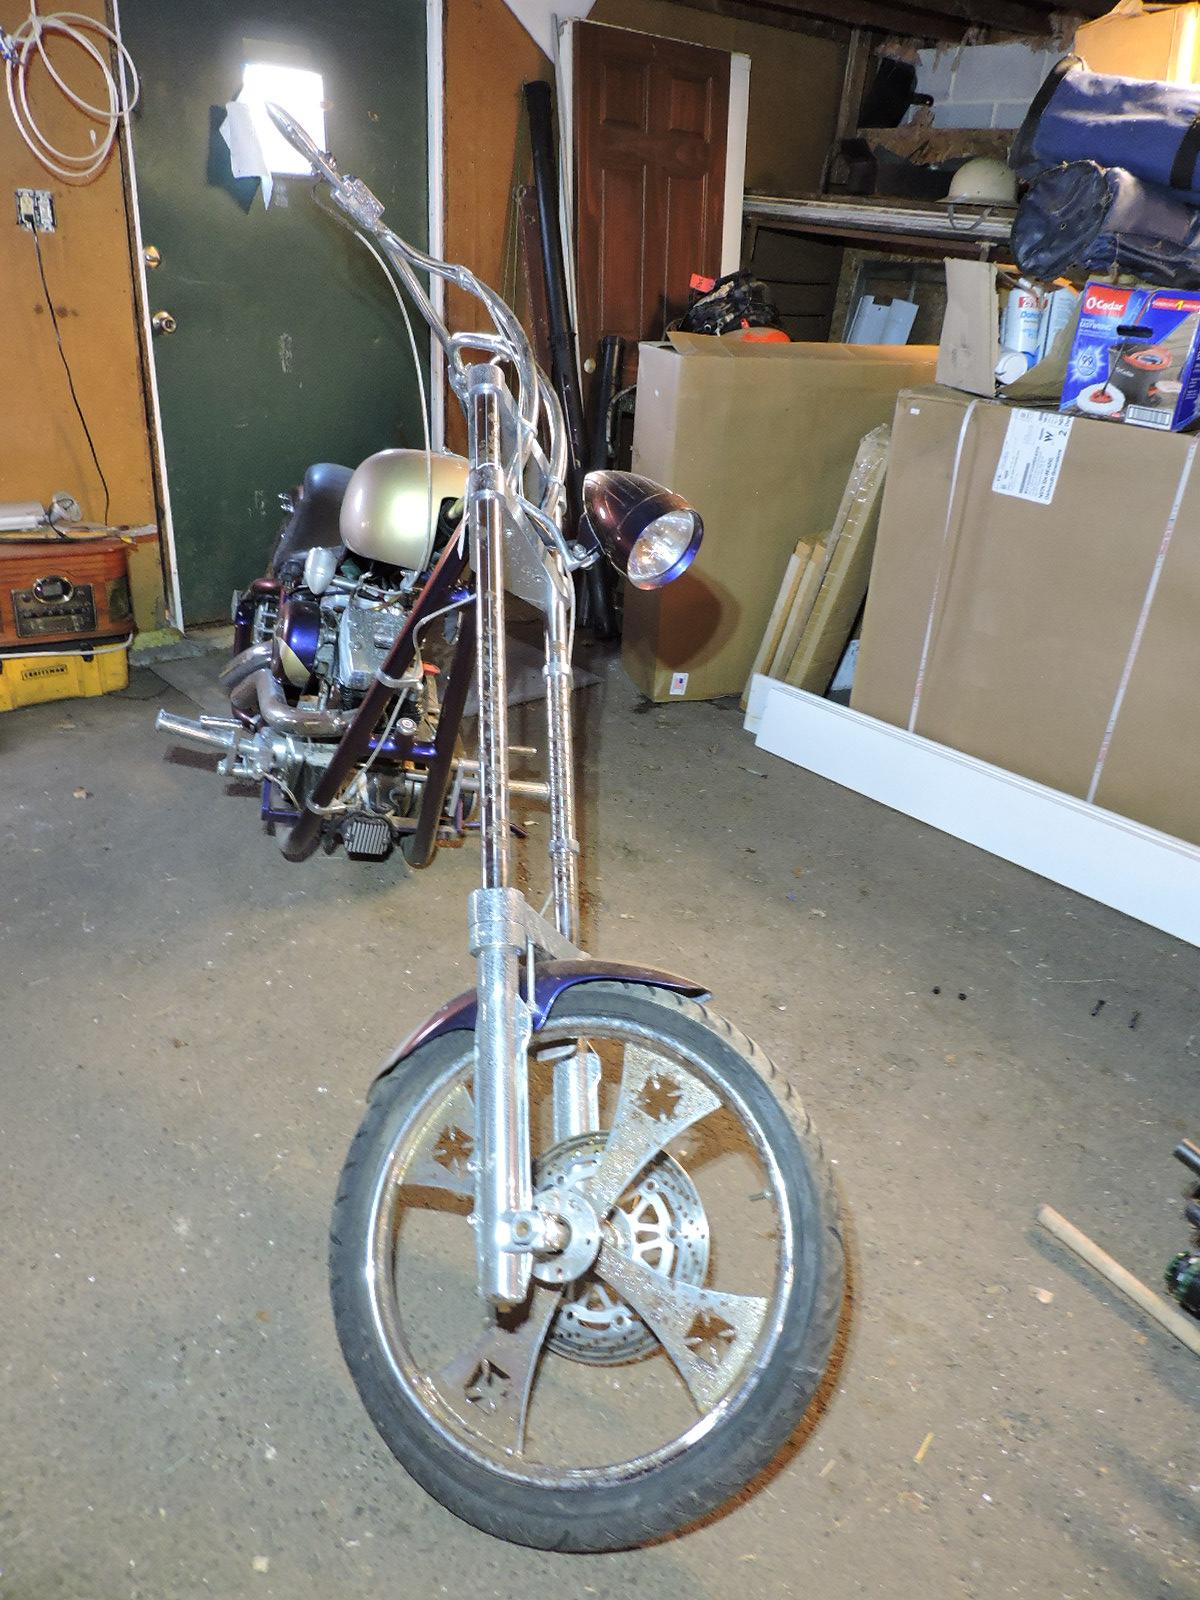 Custom Built Chopper Project / One of a Kind / Built by Sooty's Customs